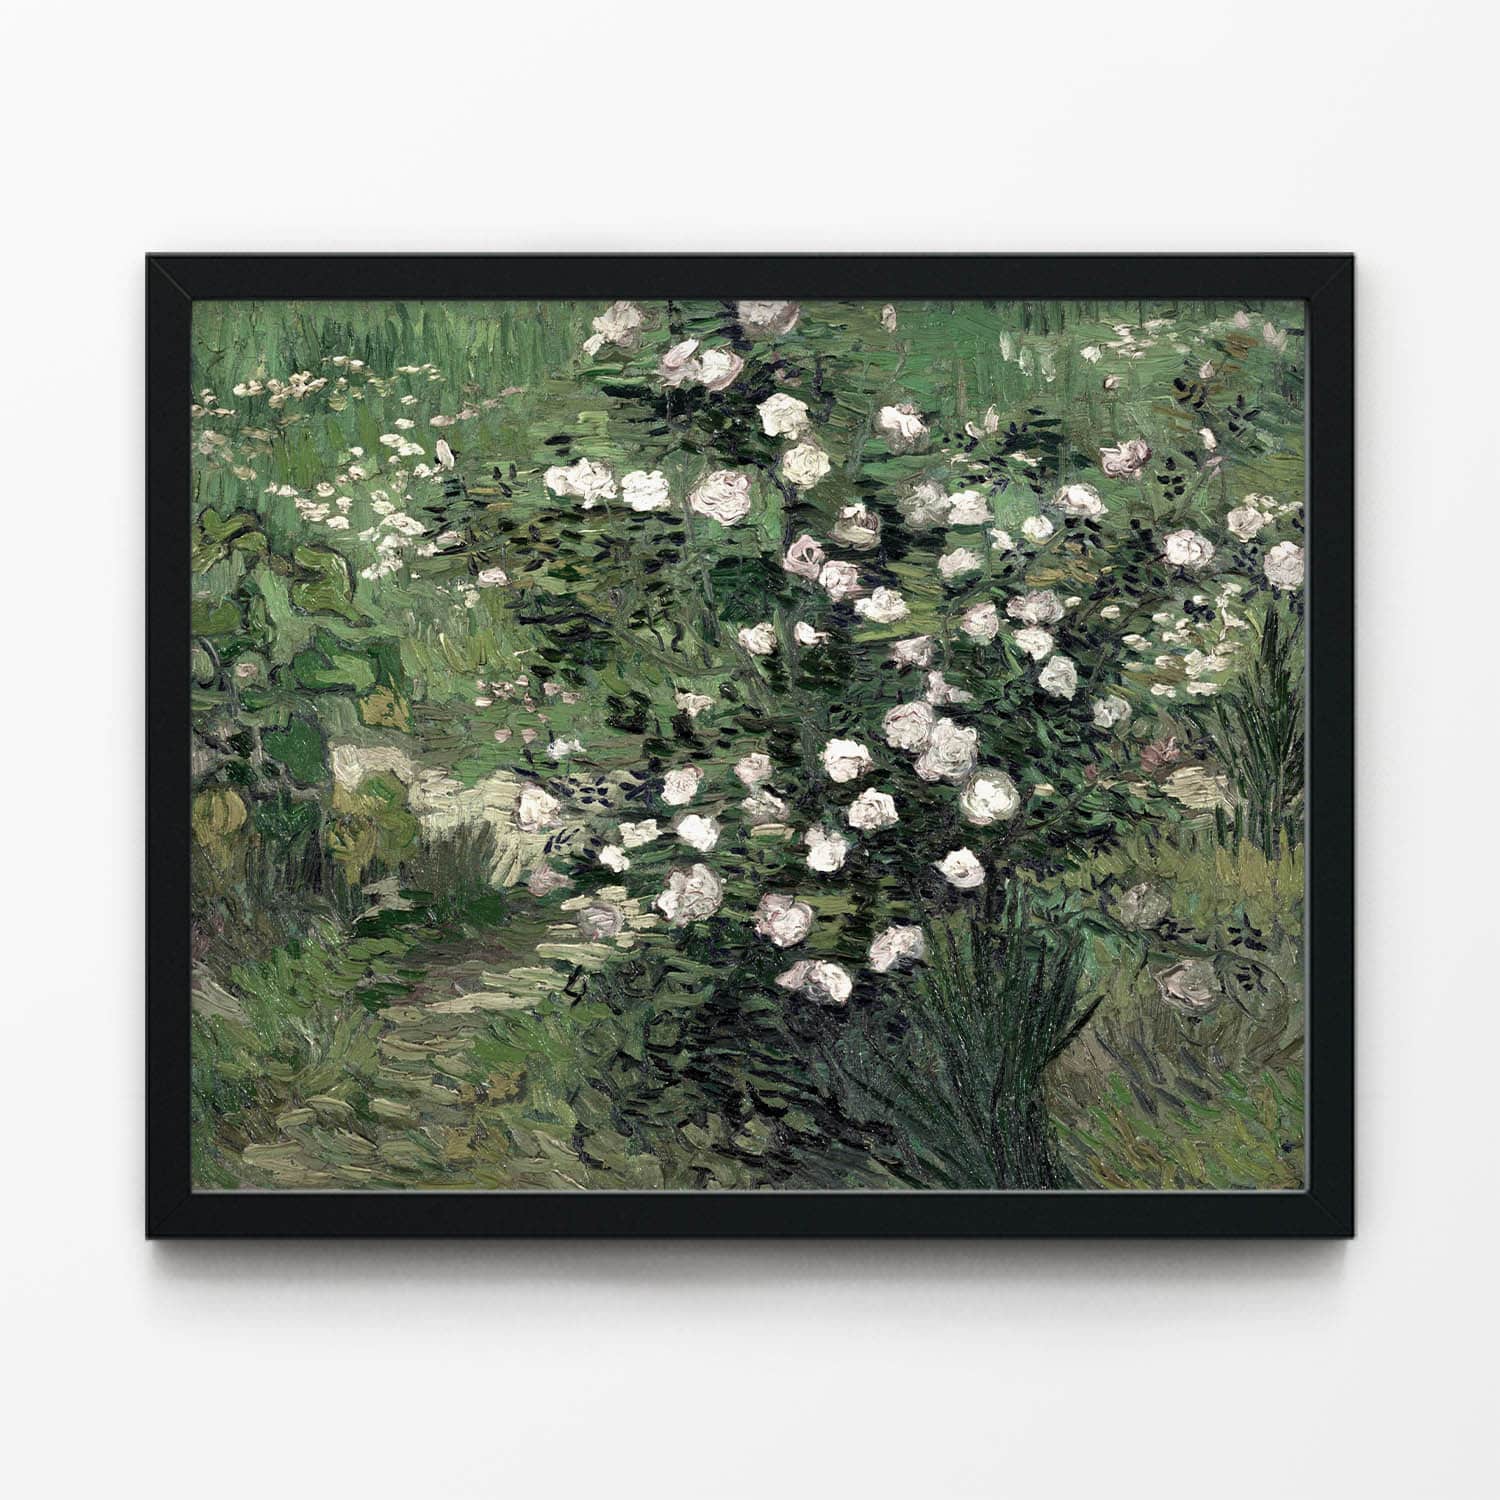 Green with White Flowers Art Print in Black Picture Frame